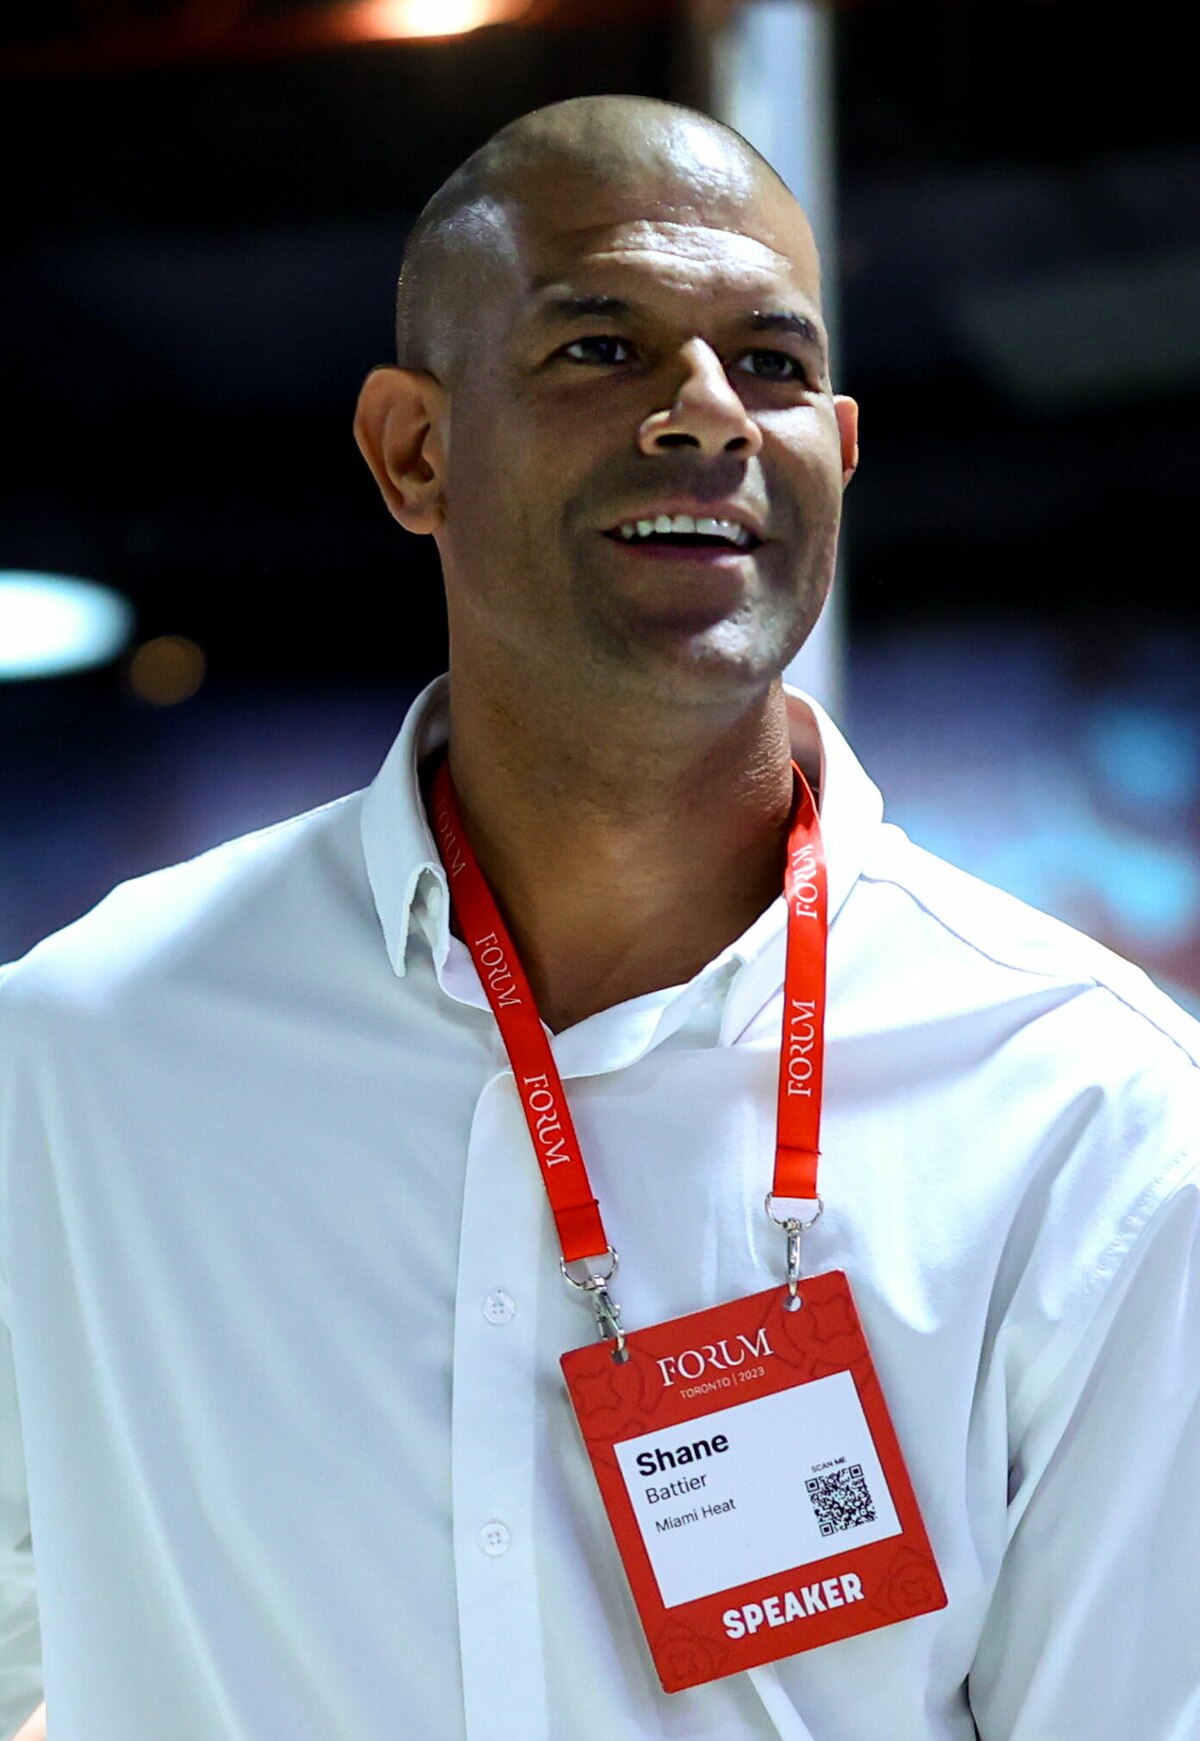 Shane Battier: Only 'act of God' could delay retirement